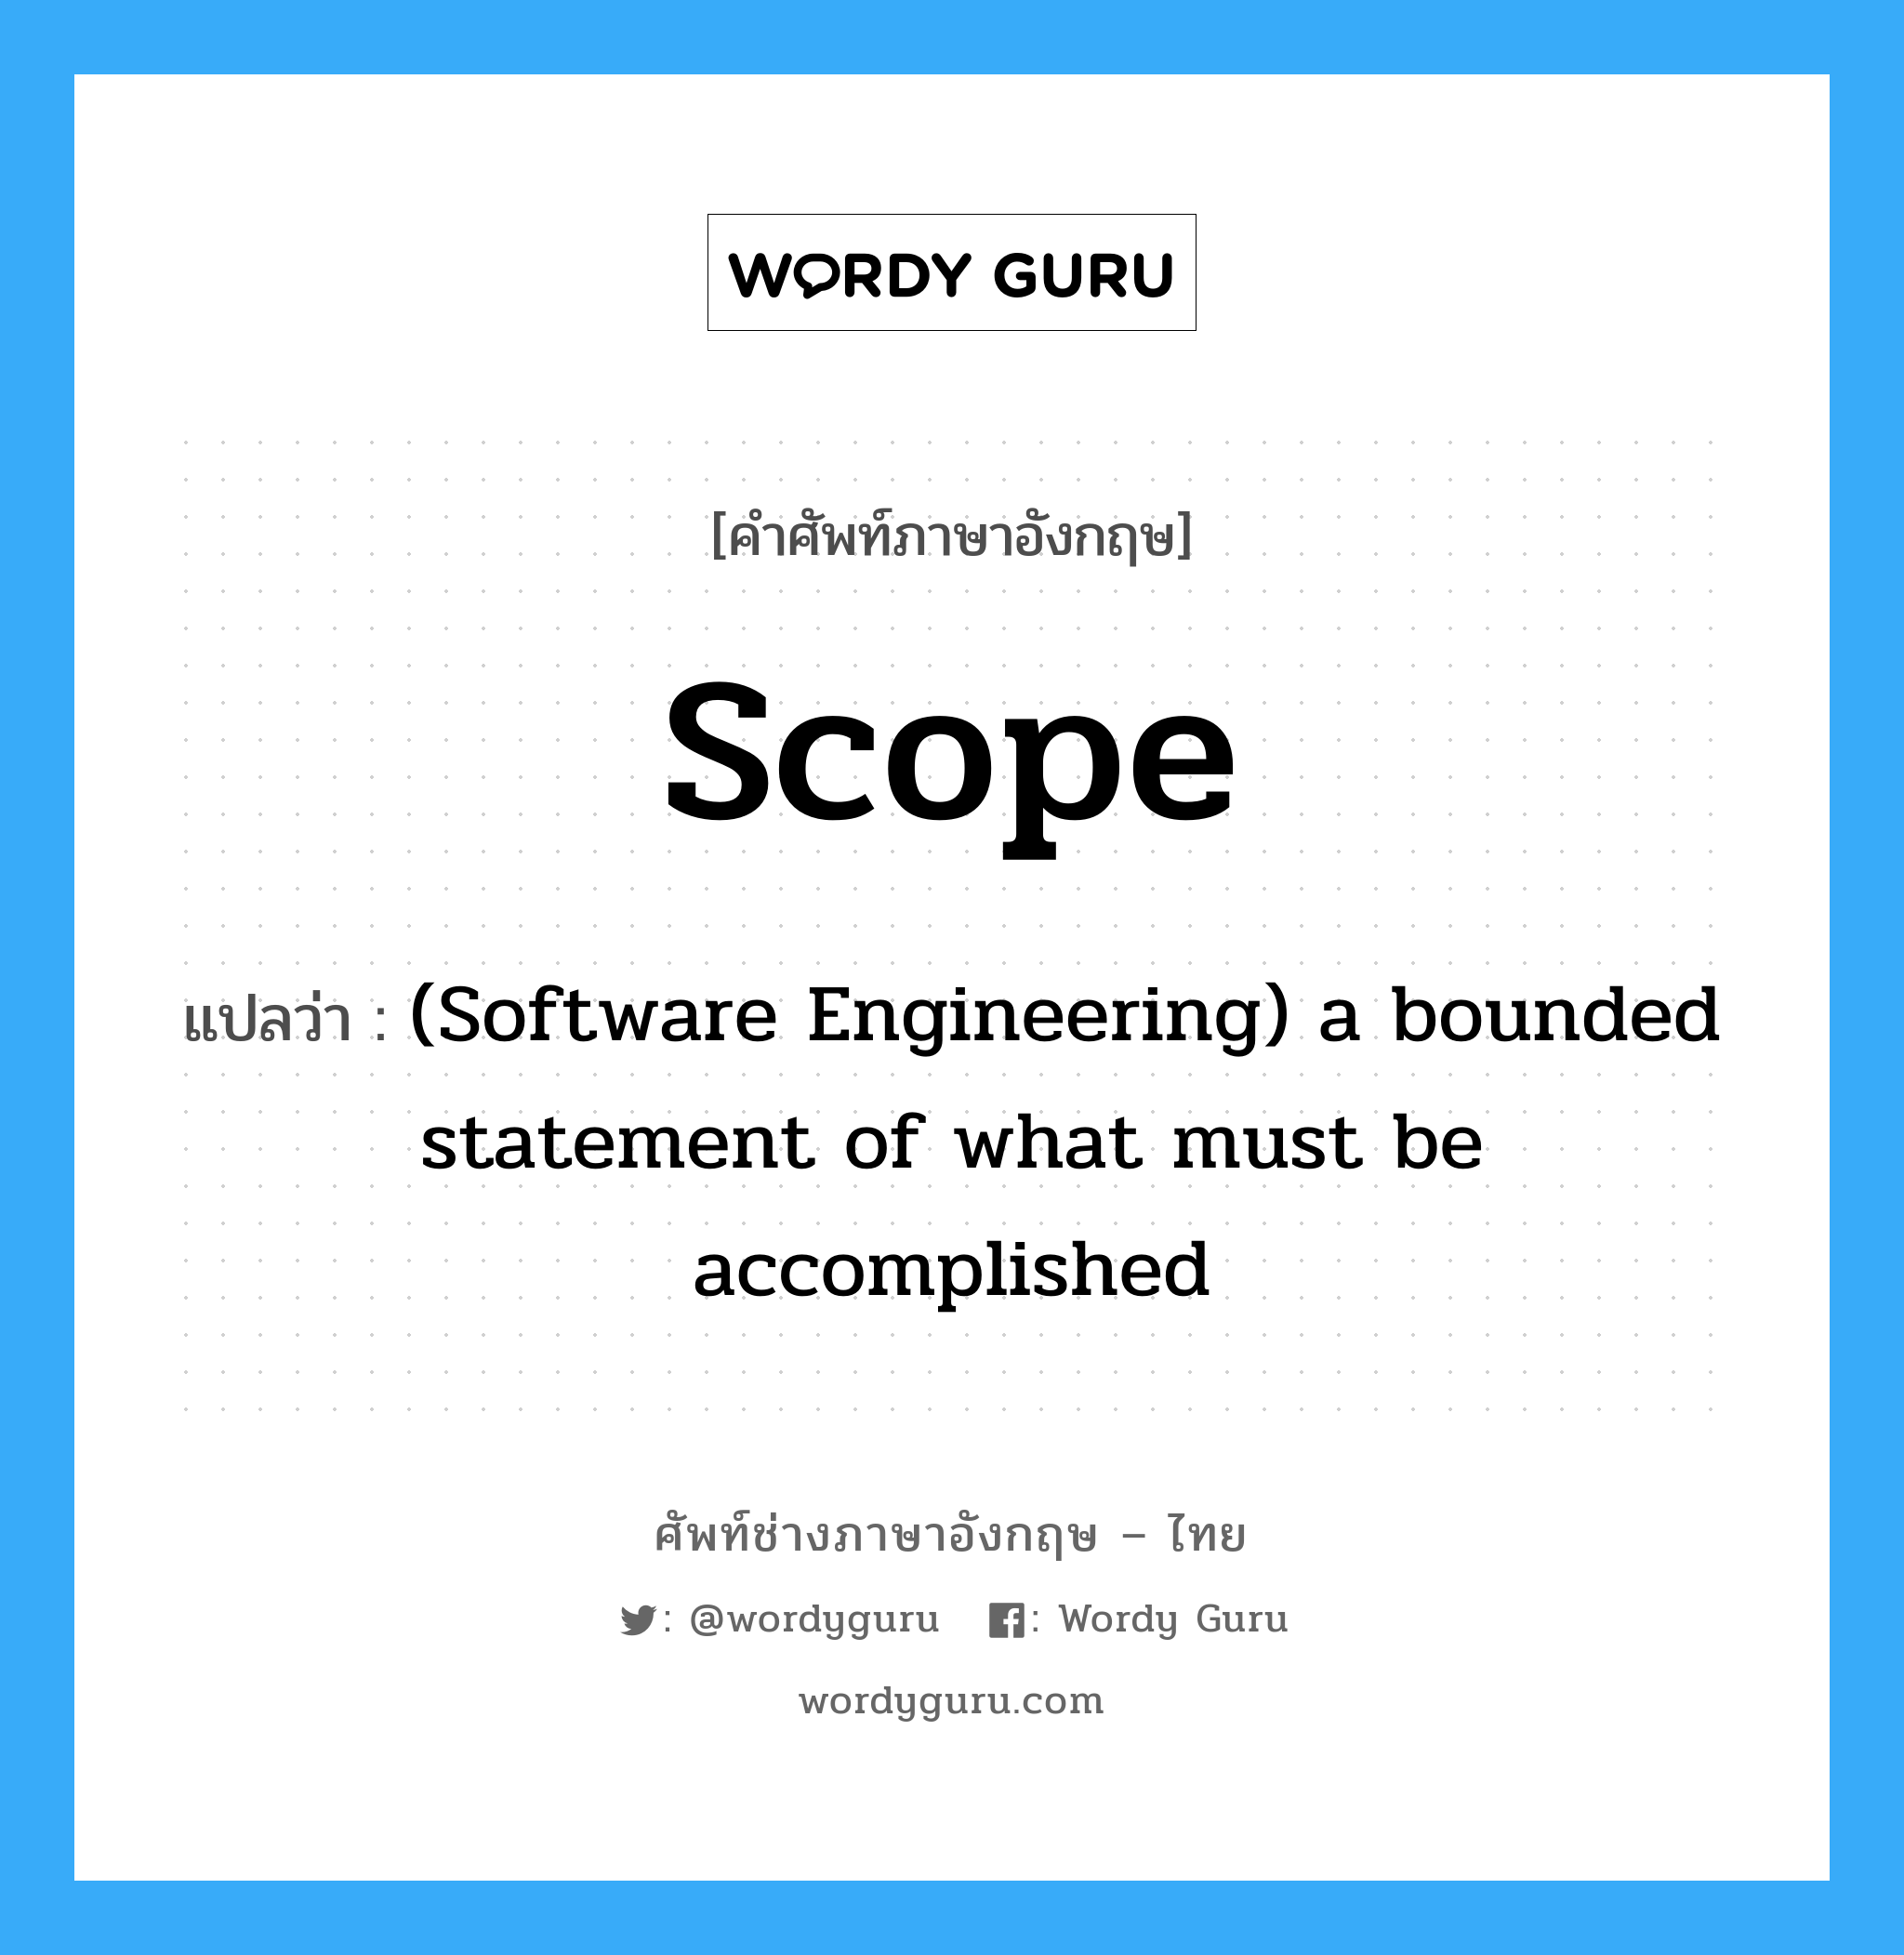 (Software Engineering) a bounded statement of what must be accomplished ภาษาอังกฤษ?, คำศัพท์ช่างภาษาอังกฤษ - ไทย (Software Engineering) a bounded statement of what must be accomplished คำศัพท์ภาษาอังกฤษ (Software Engineering) a bounded statement of what must be accomplished แปลว่า Scope